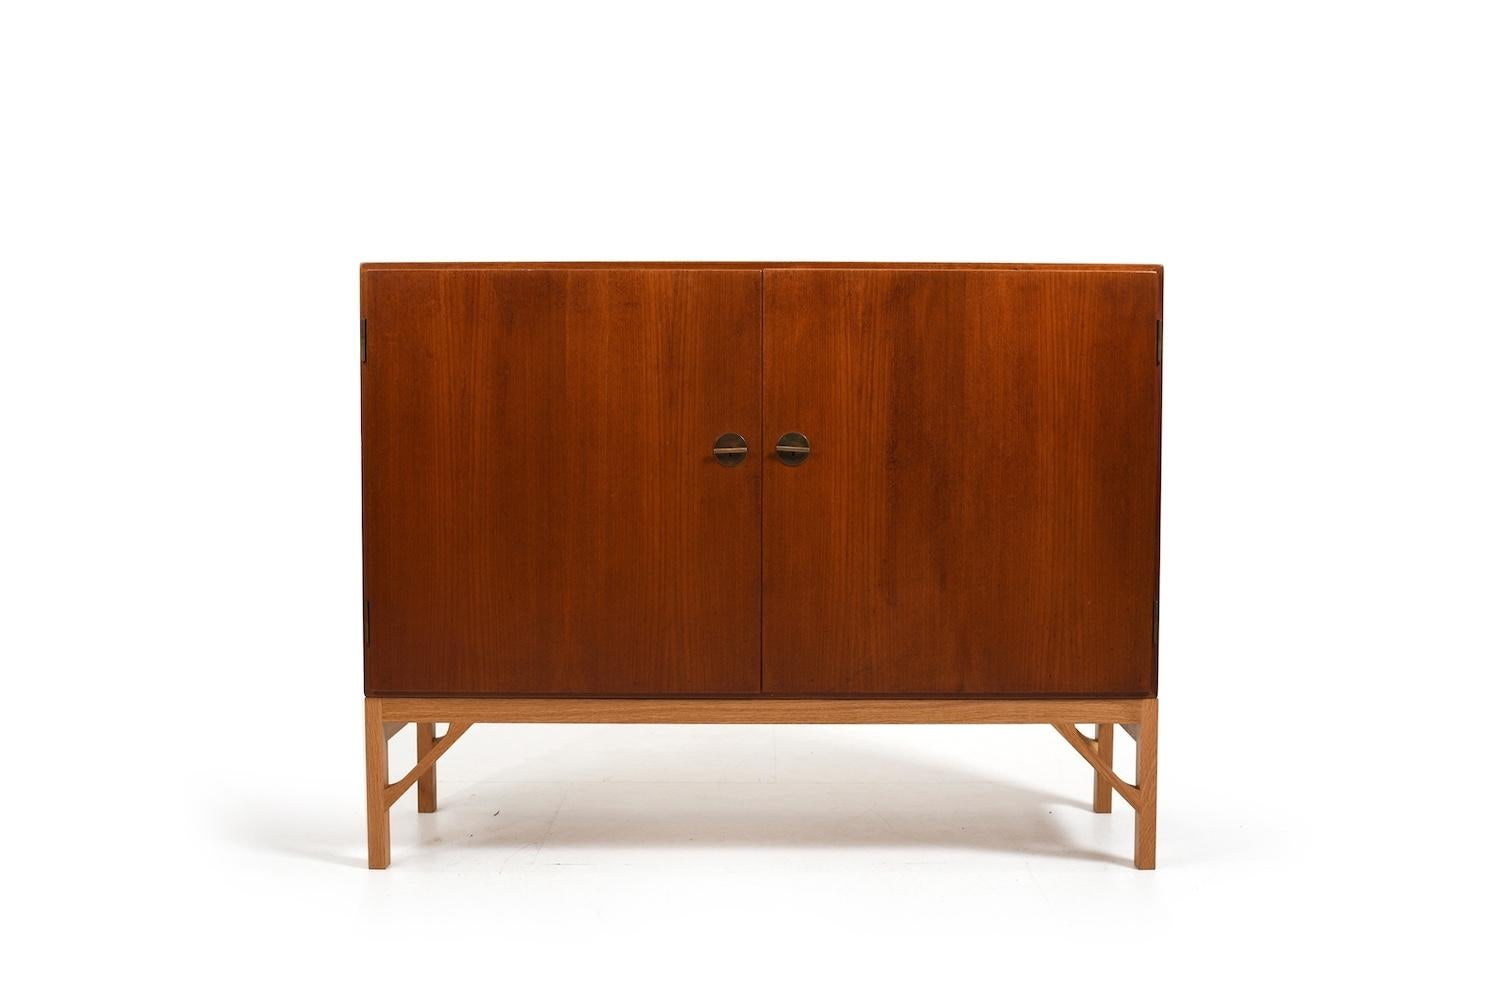 Sideboard / cabinet, model no.232 by Børge Mogensen for FDB Møbler Denmark. Brass handles. He designed his China Series in 1960s. Made in teak and base in oak. Produced 1960s.

Note. Please have a look on the matching bookcases in our collection.